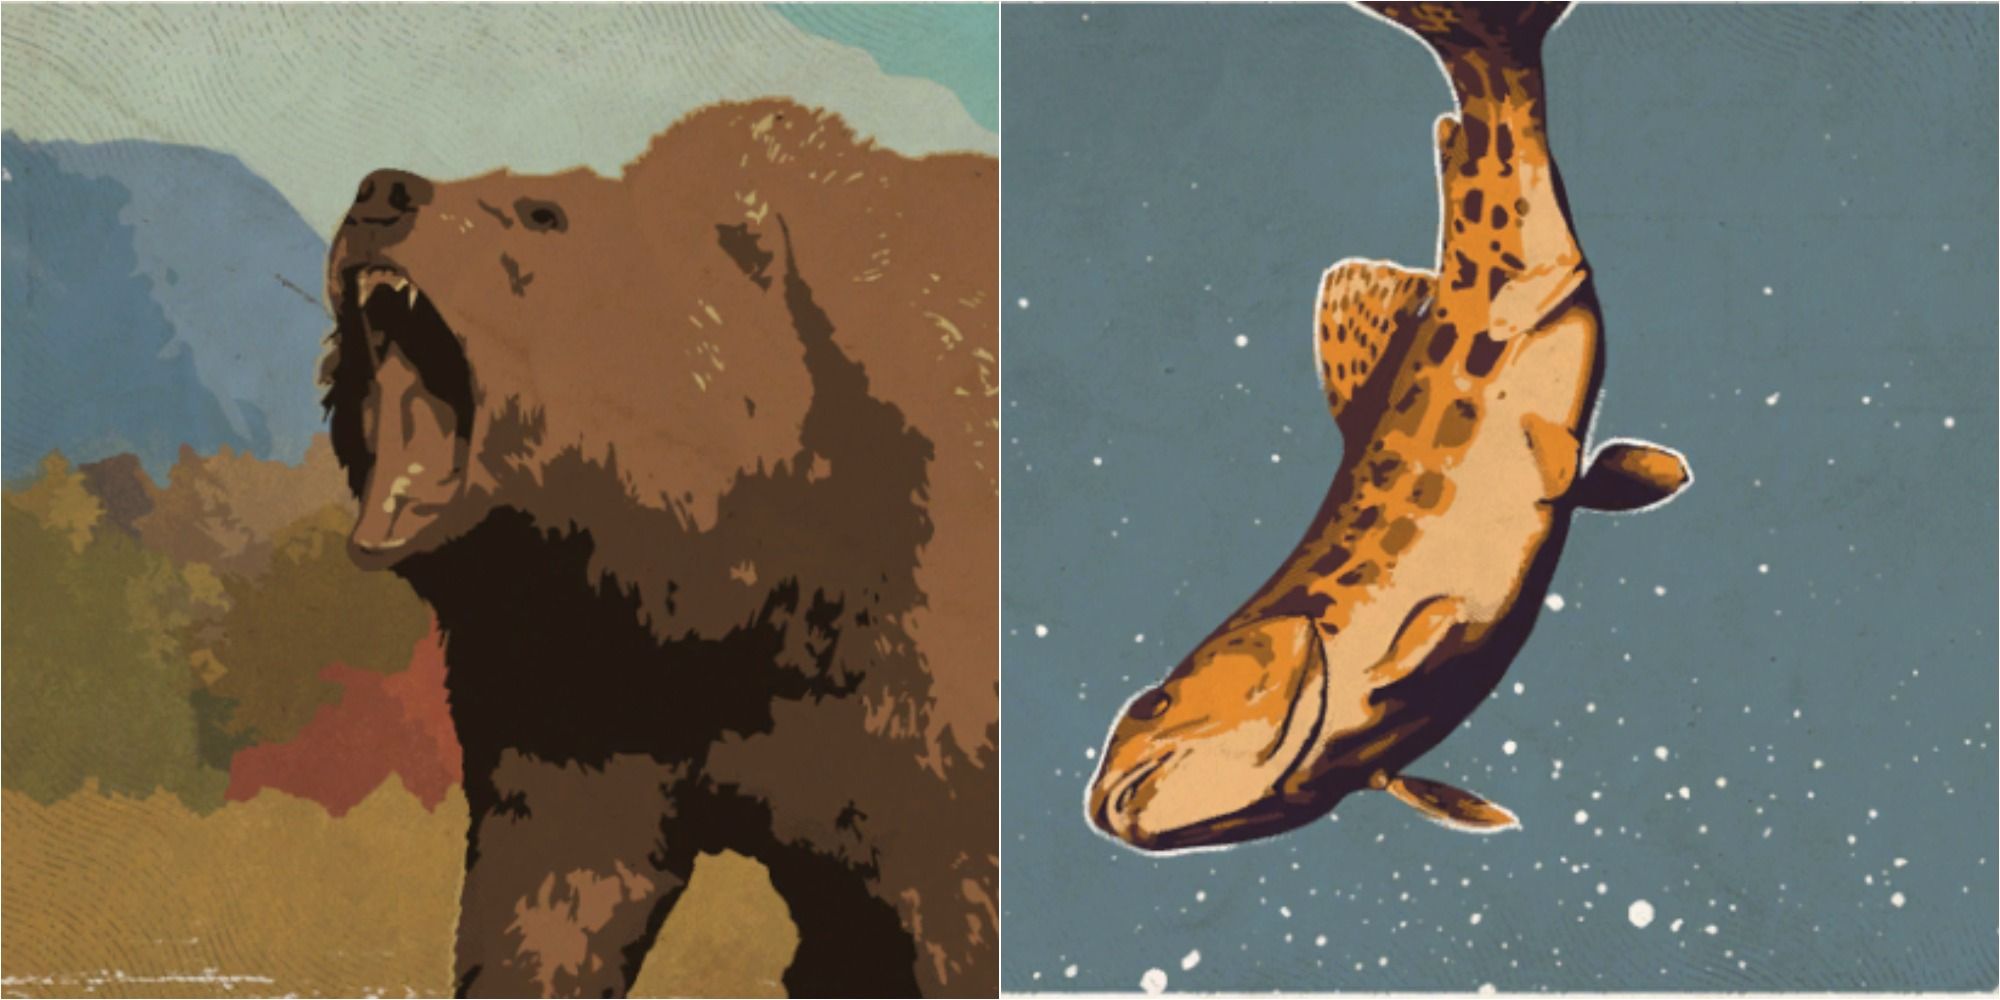 Far Cry 5 Hunting and Fishing Challenges Featured Split Image Bear and Fish